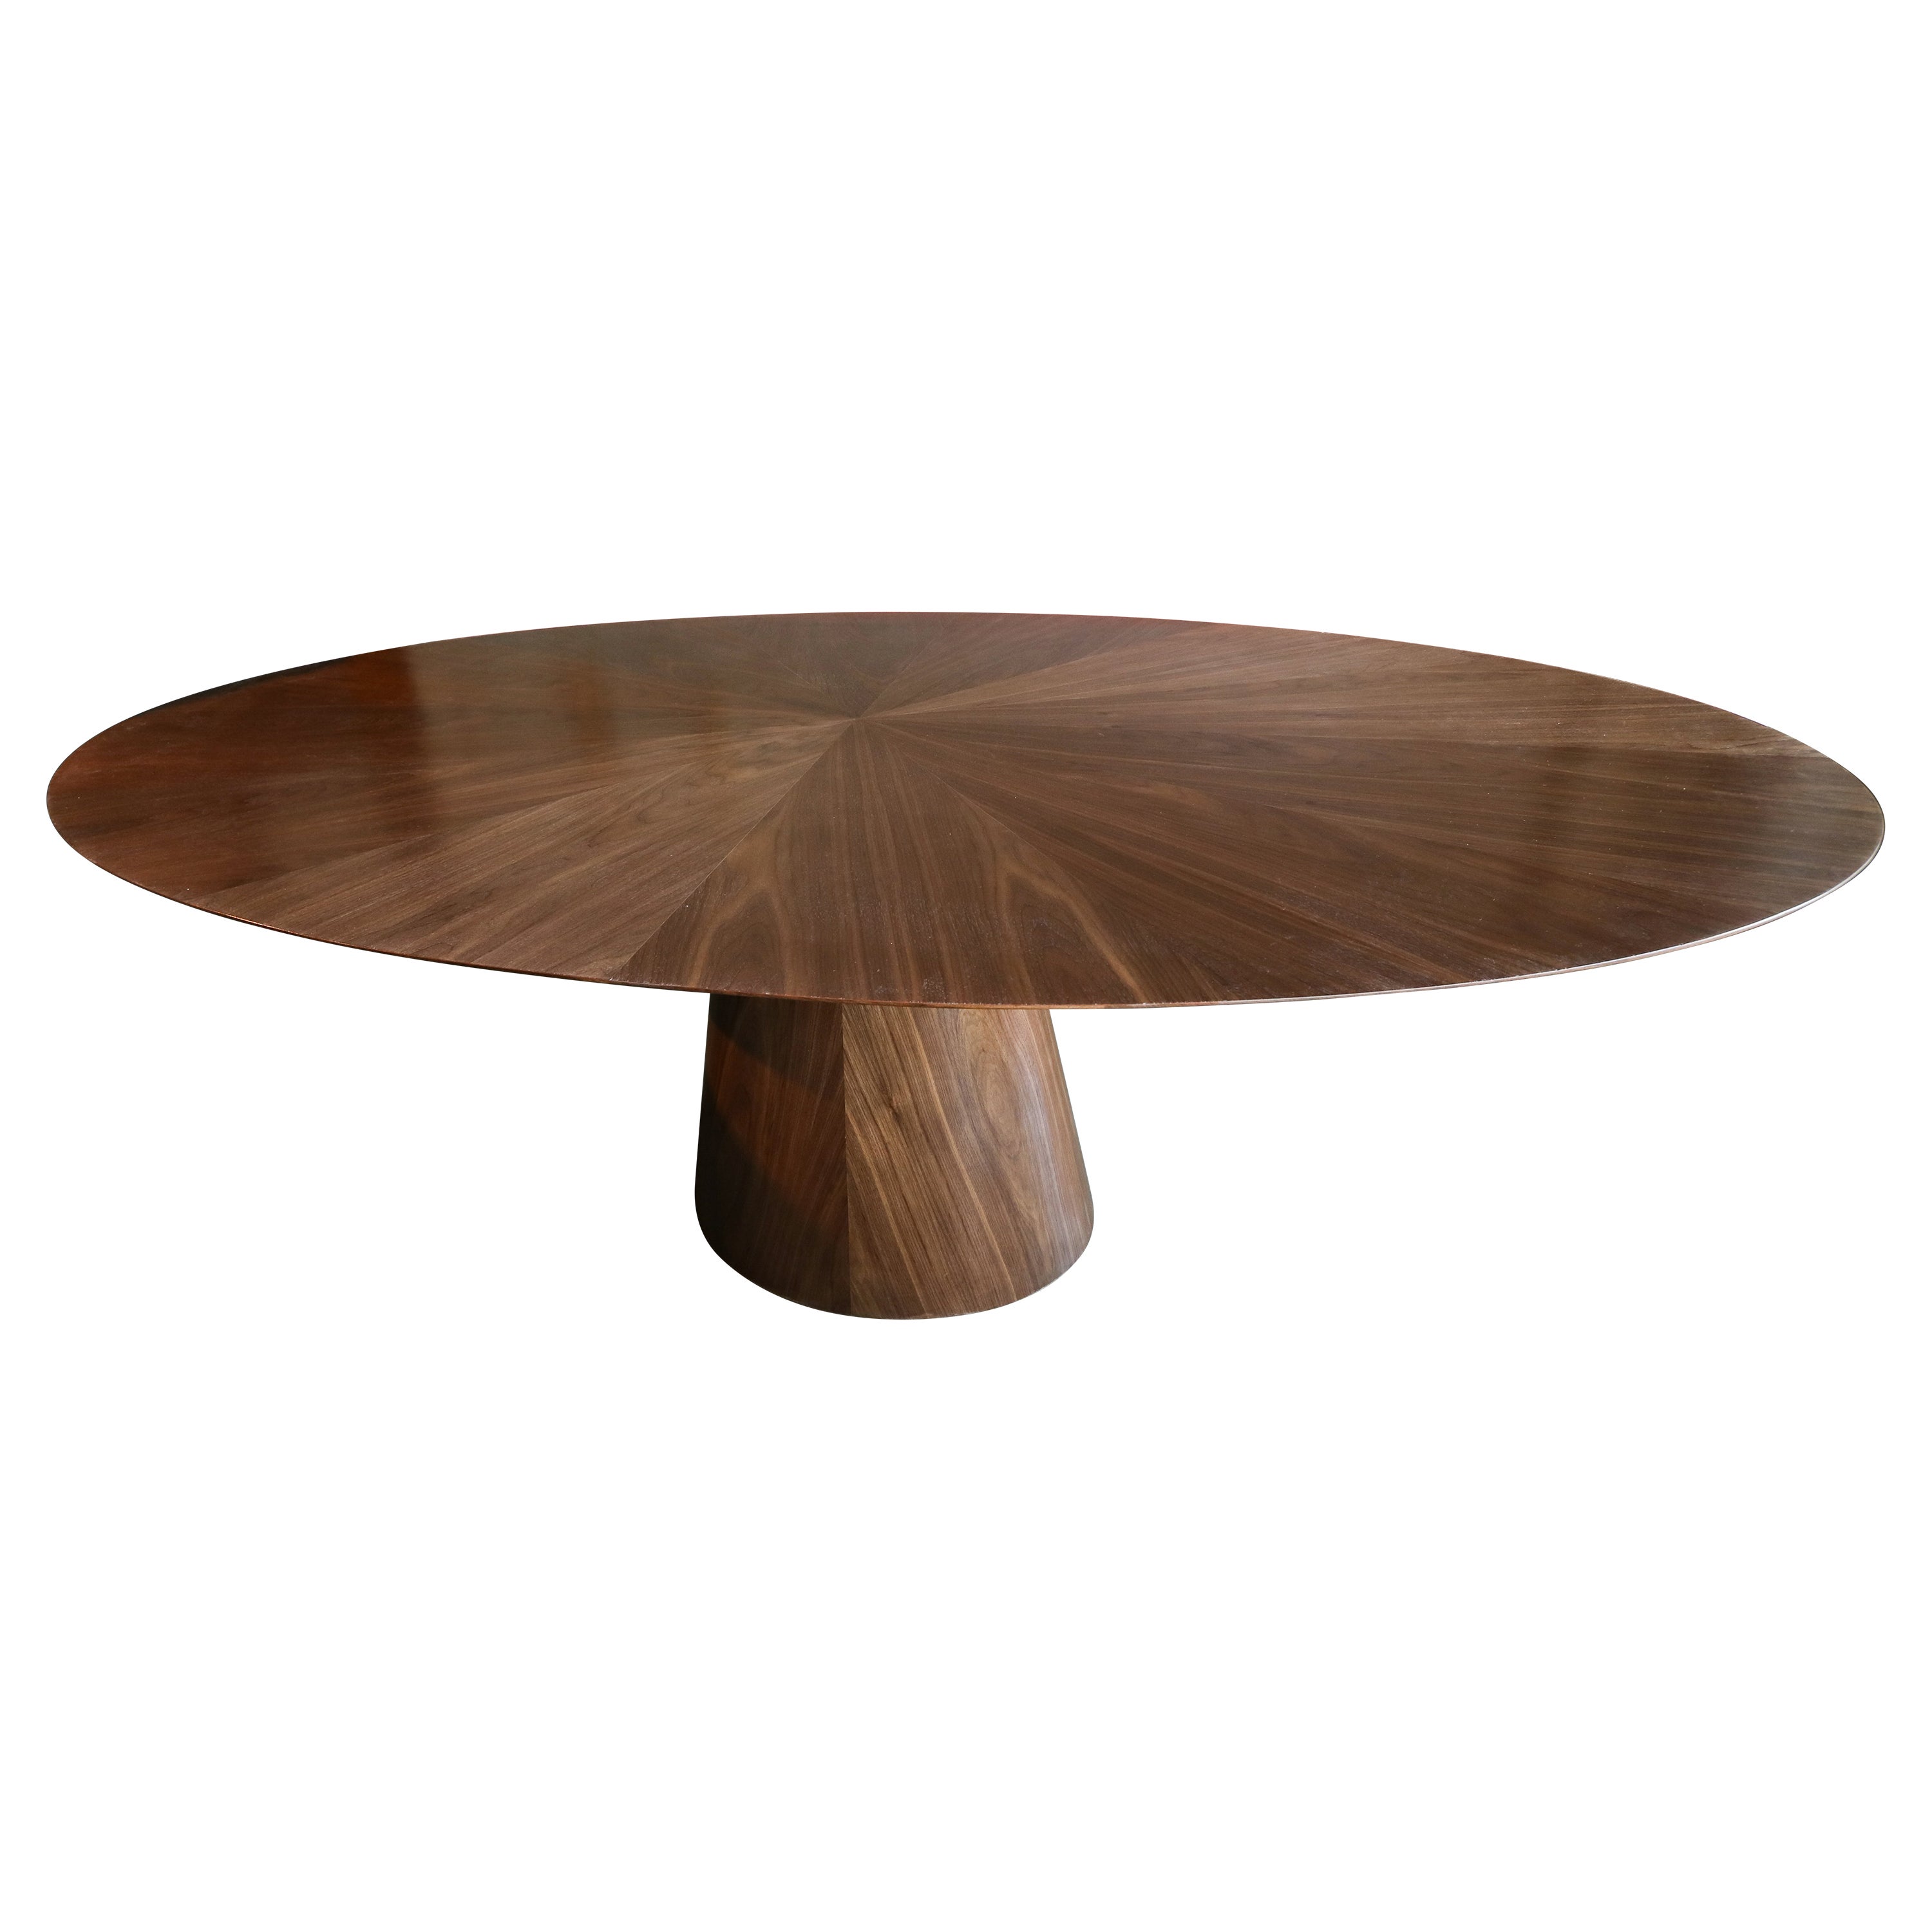 Custom Mid Century Style Walnut Oval Dining Table with Pedestal Base by Adesso